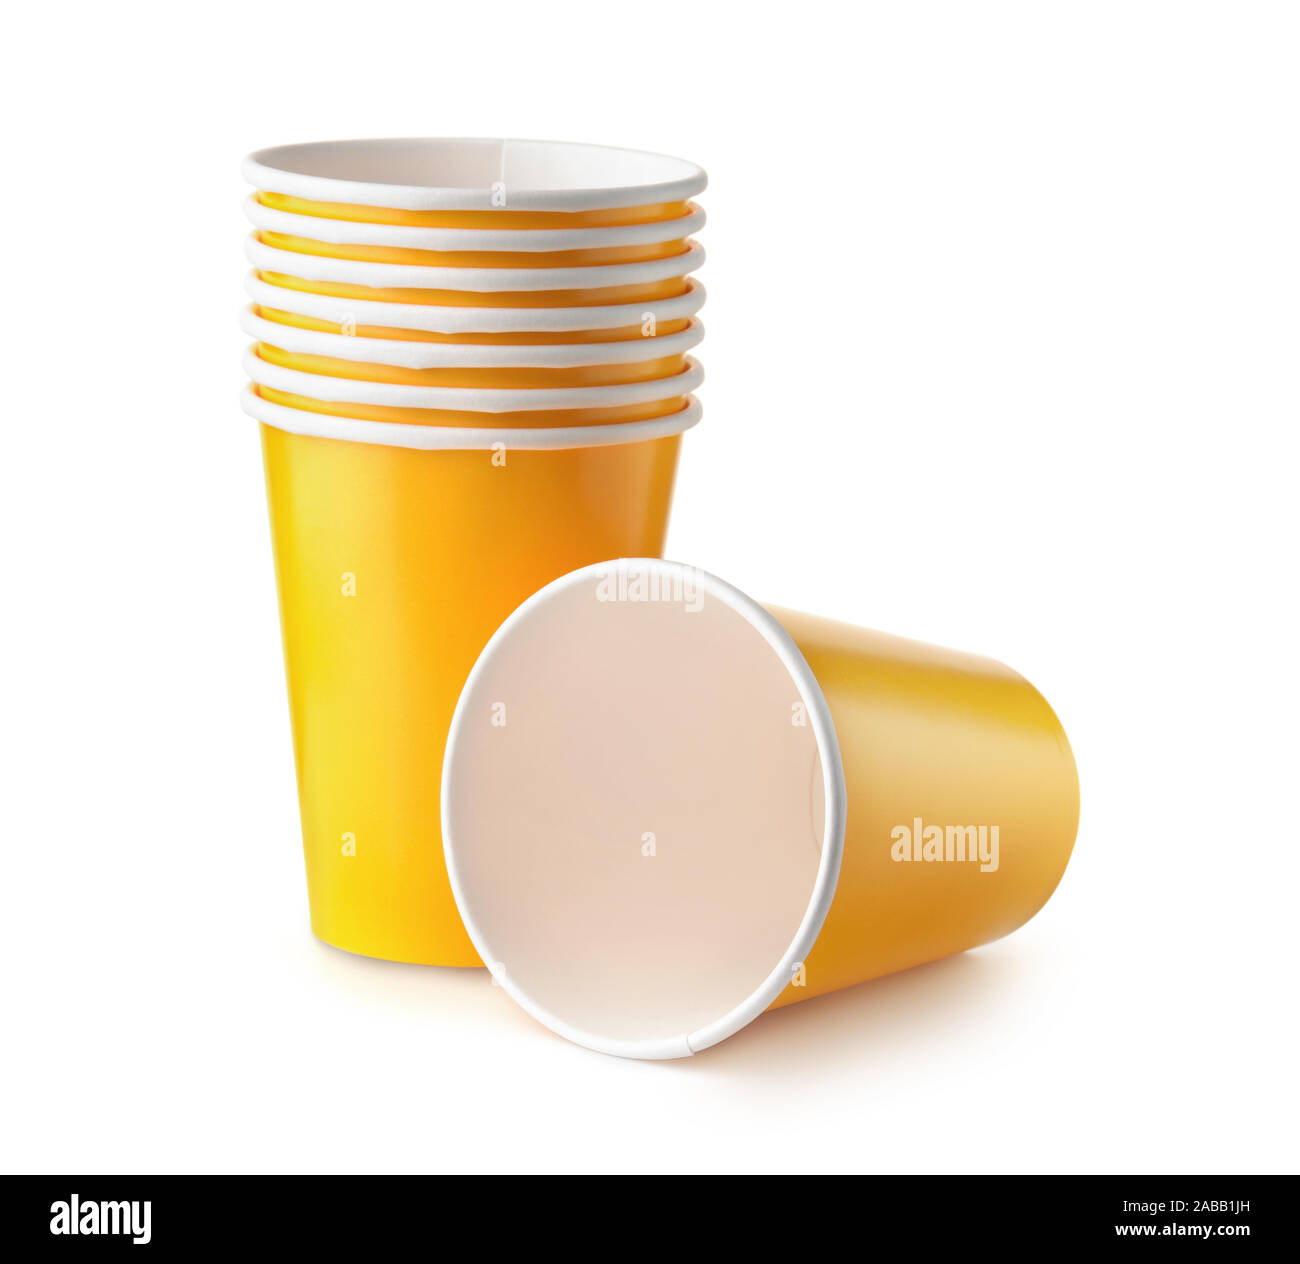 https://c8.alamy.com/comp/2ABB1JH/group-of-yellow-disposable-paper-cups-isolated-on-white-2ABB1JH.jpg